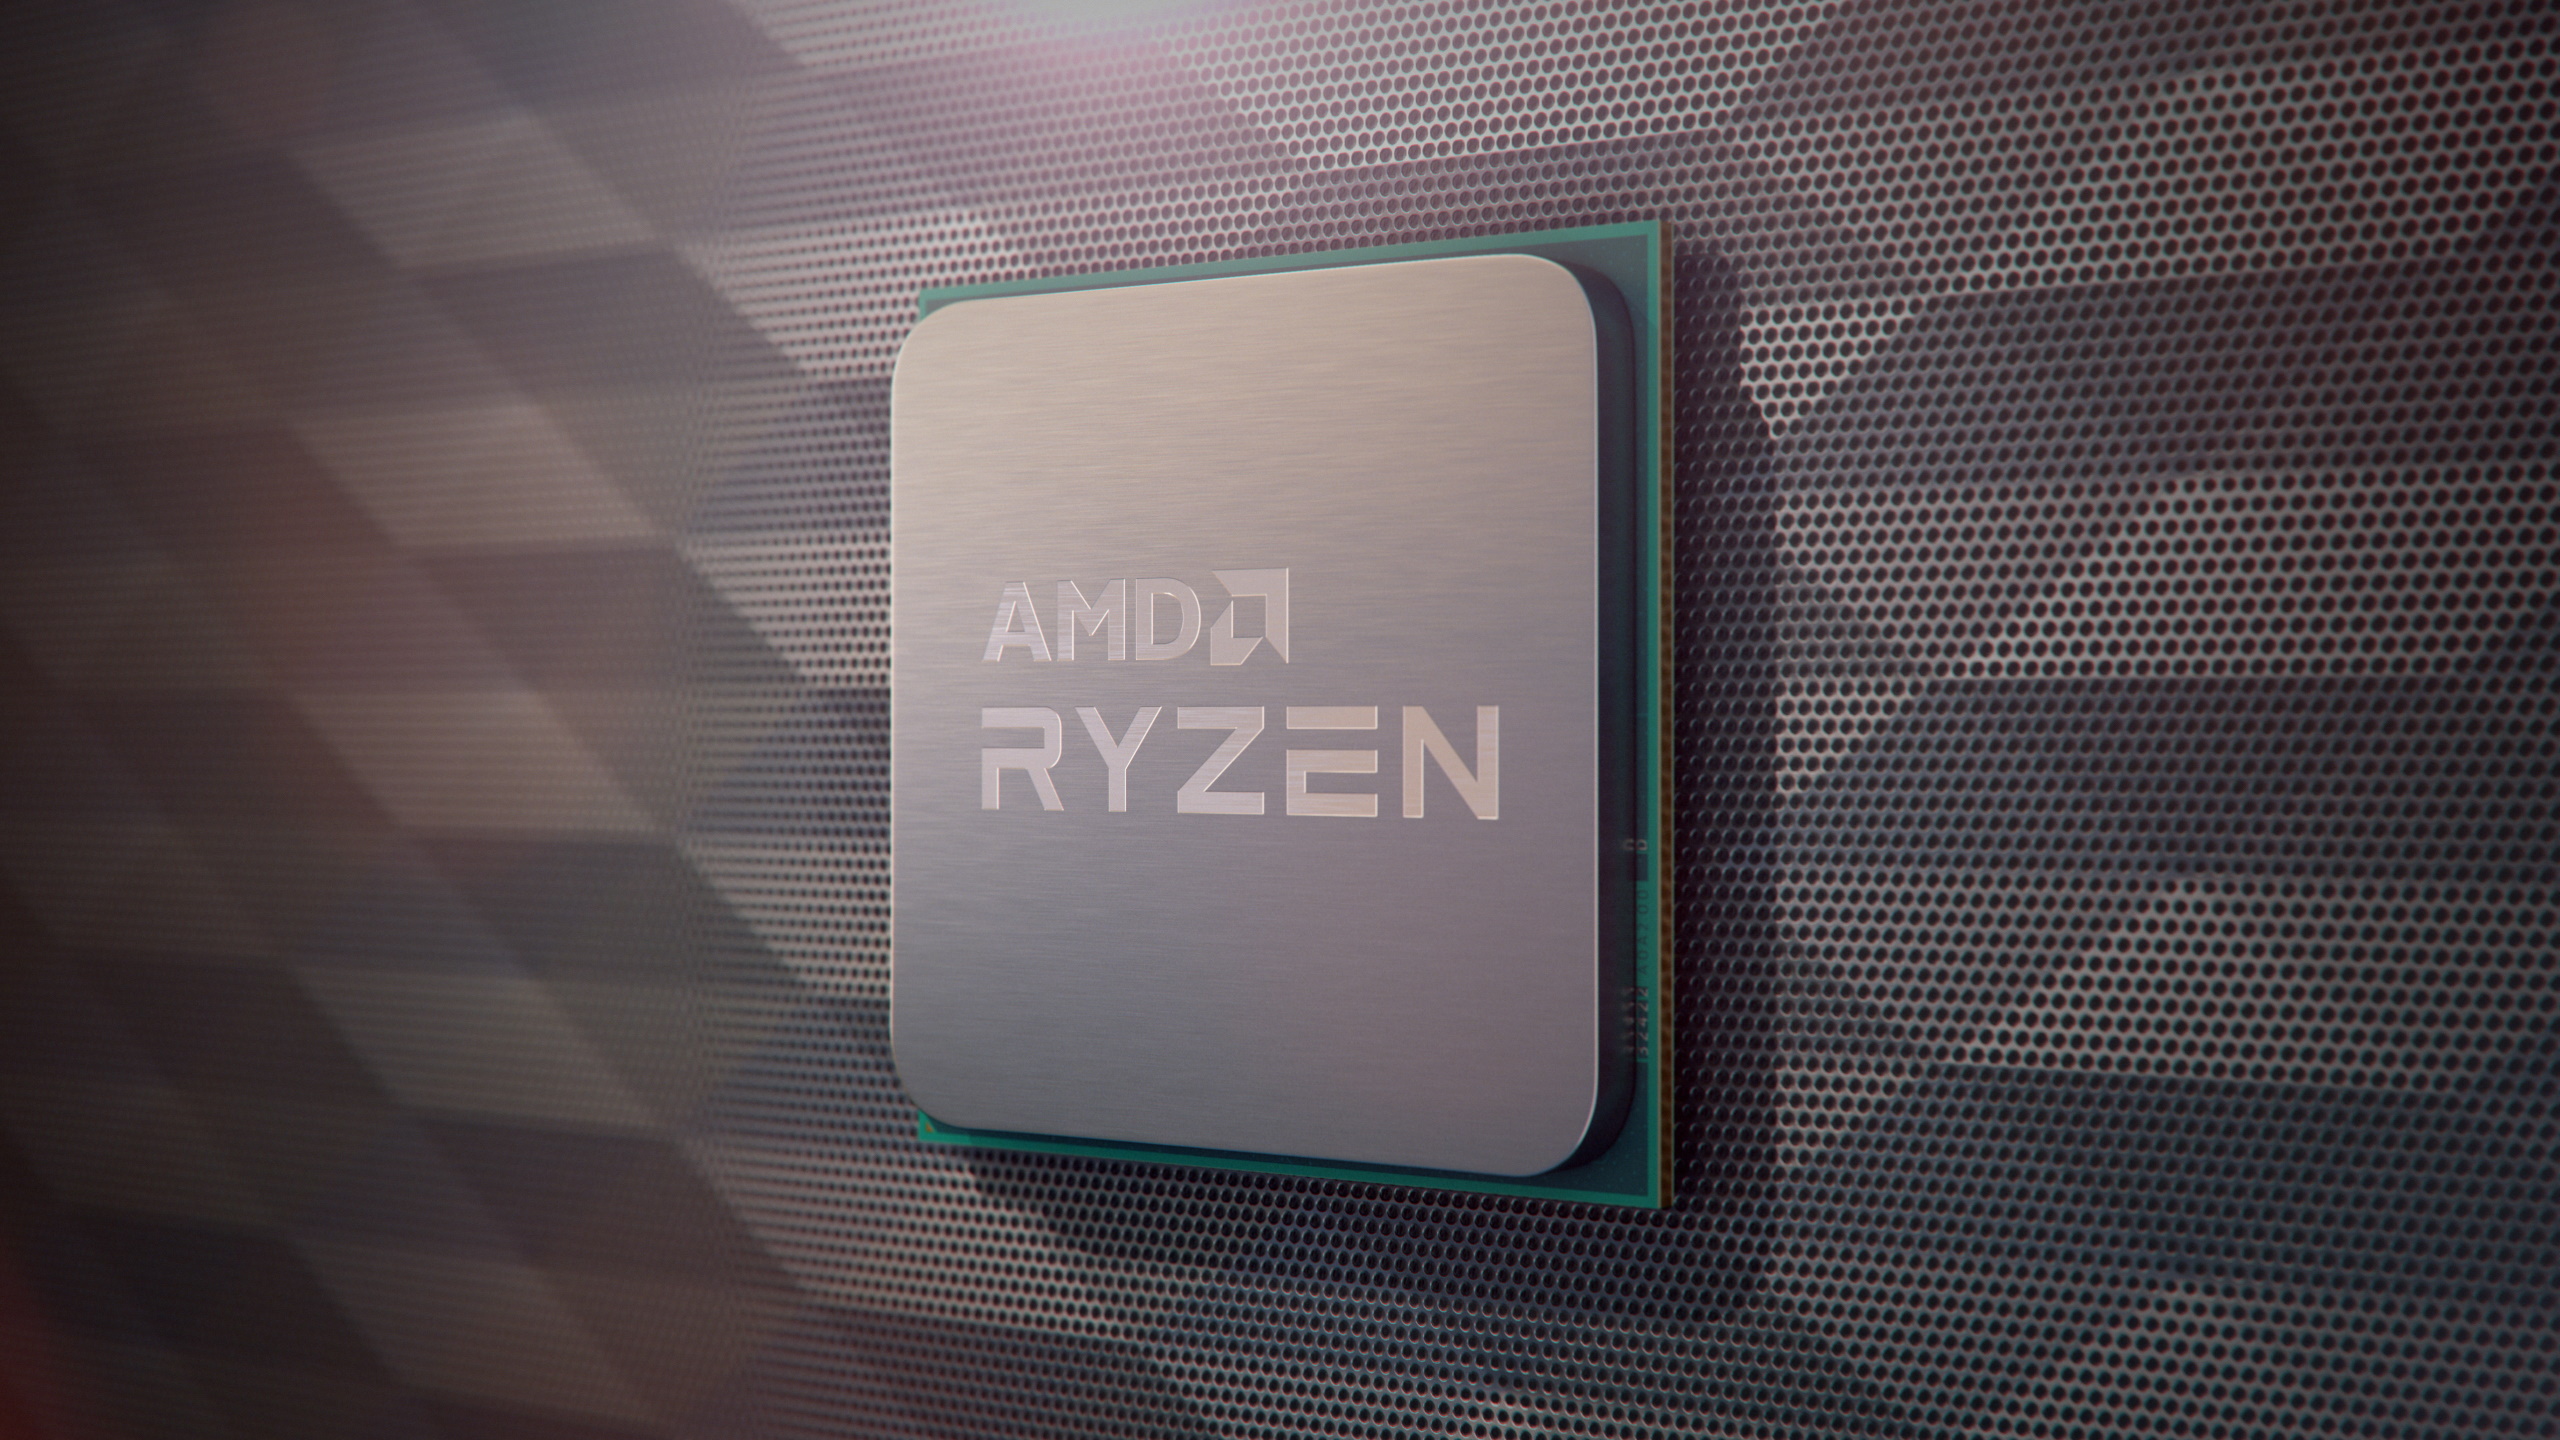  AMD would've tested Ryzen XT CPUs against Intel's 10th Gen... if it could find stock  